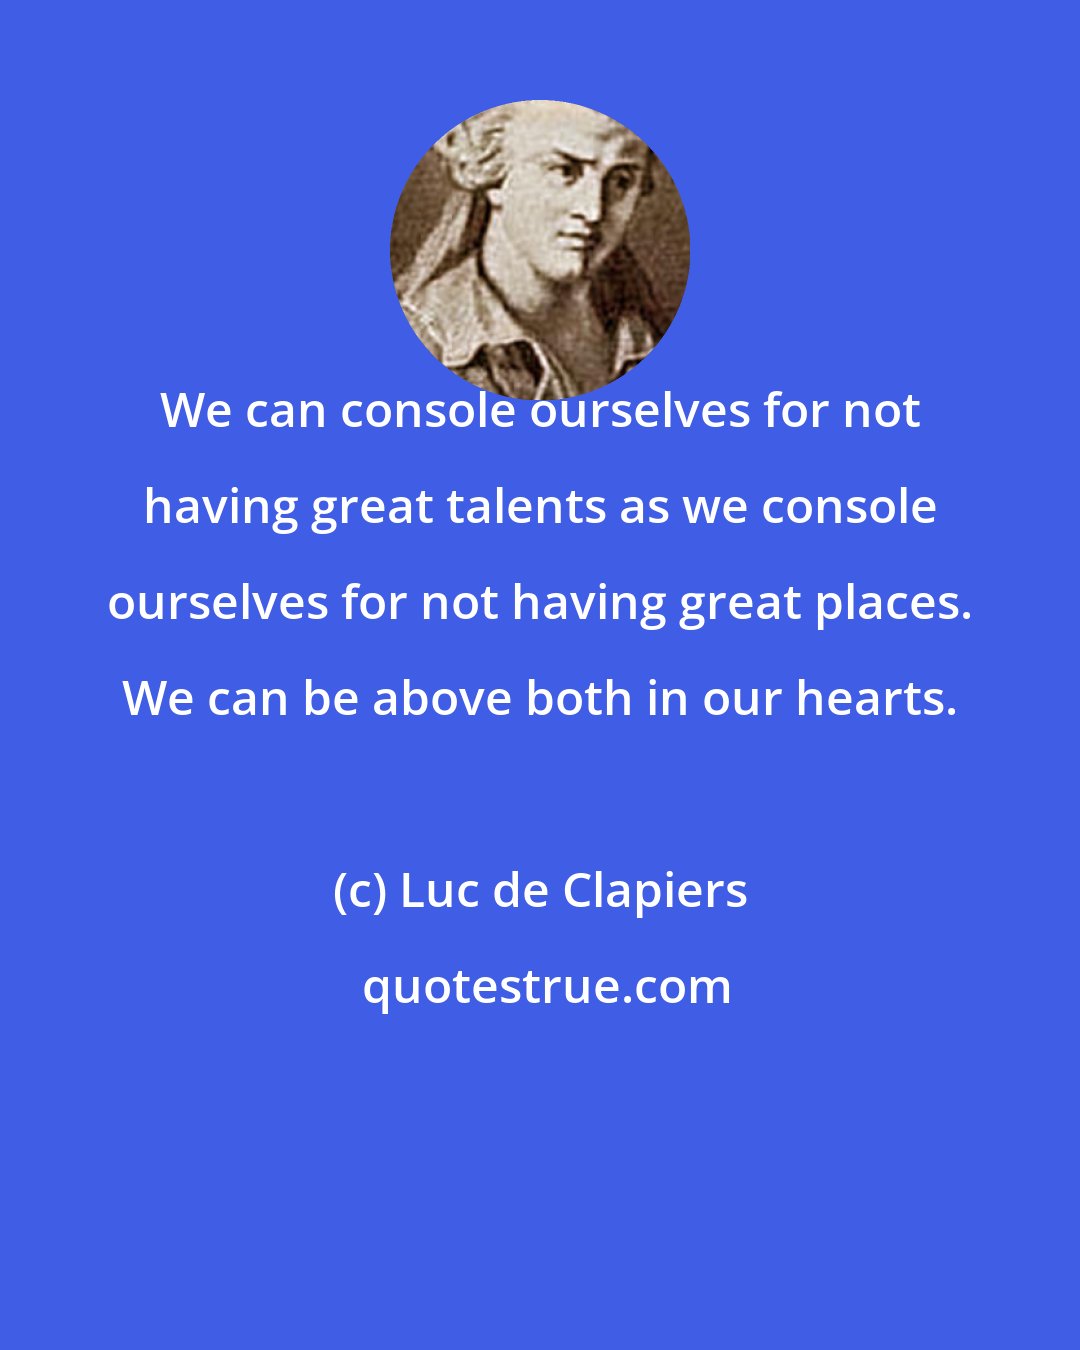 Luc de Clapiers: We can console ourselves for not having great talents as we console ourselves for not having great places. We can be above both in our hearts.